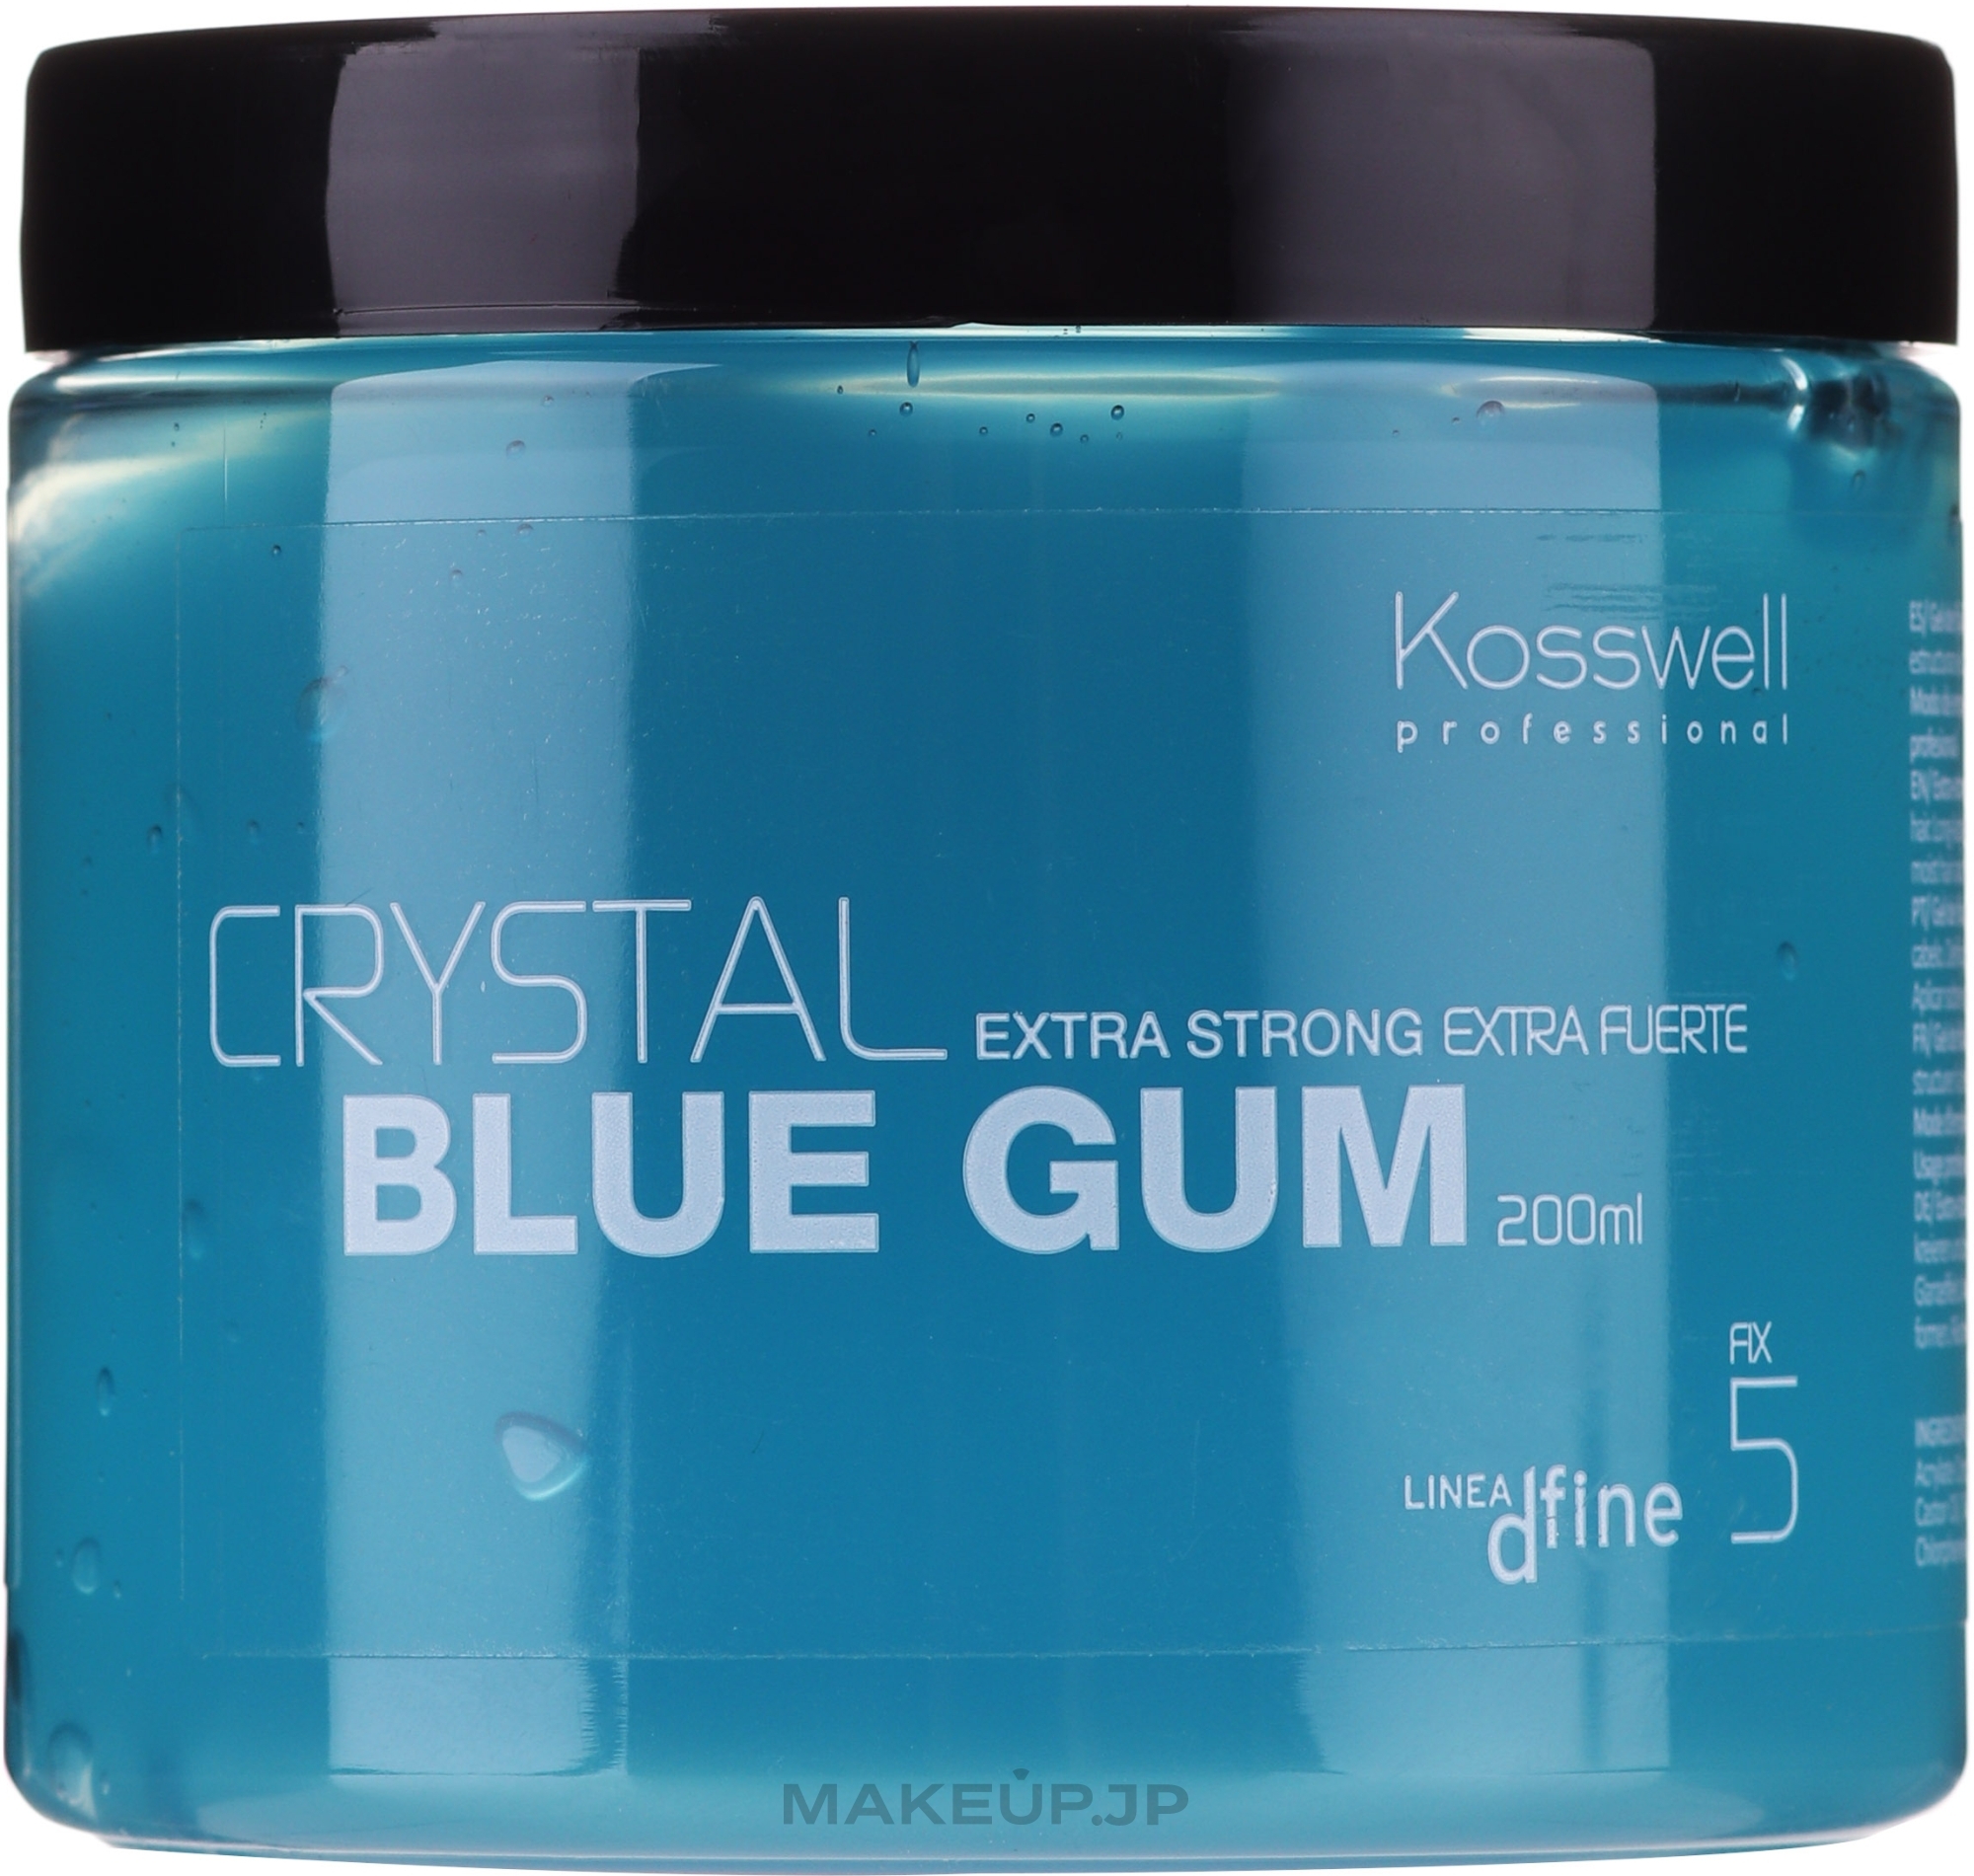 Long-Lasting Structuring Hair Gel - Kosswell Professional Dfine Crystal Blue Gum — photo 200 ml